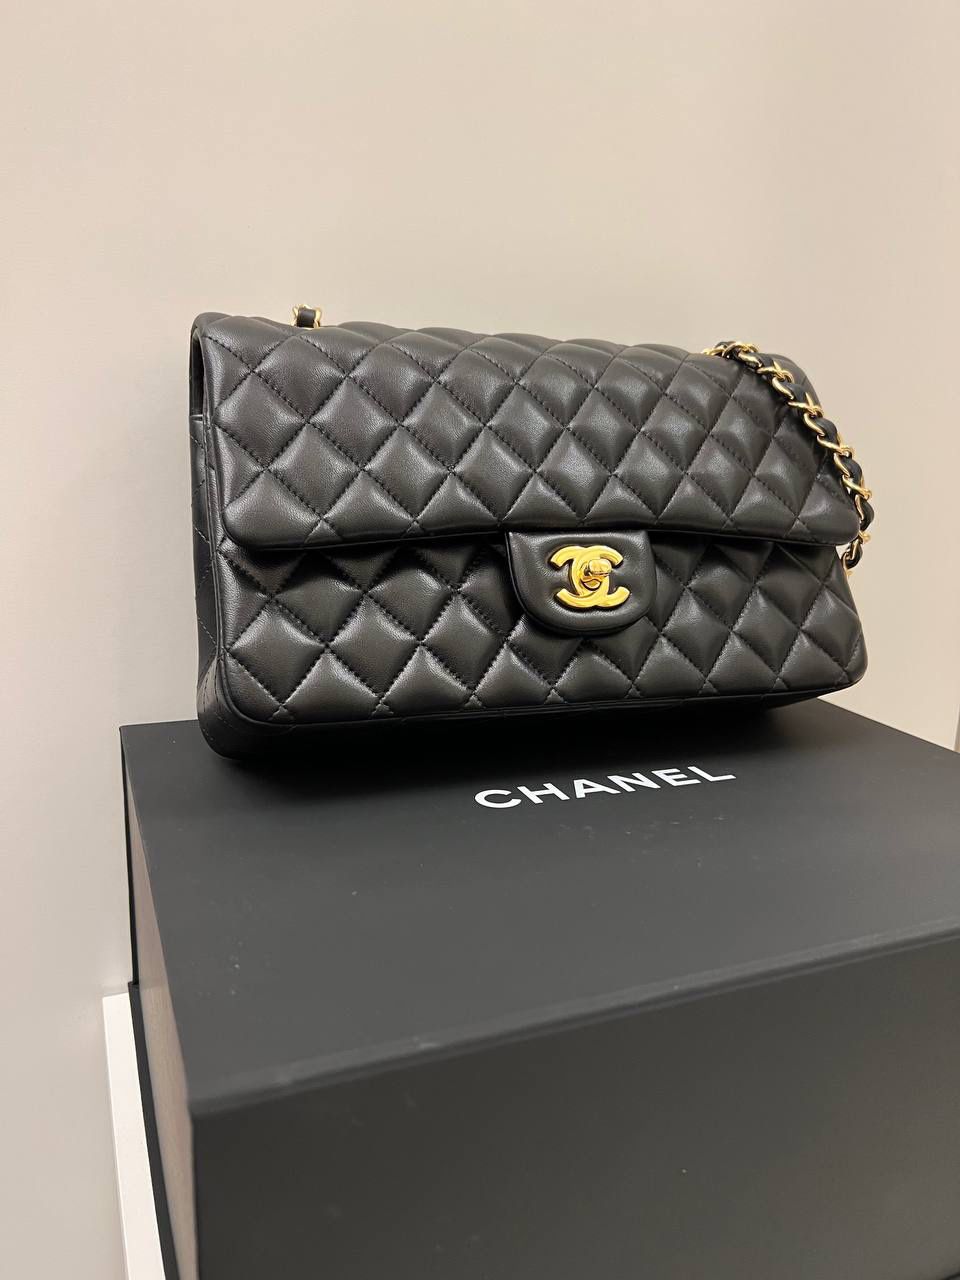 Chanel Classic Lambskin Double Flap Quilted Medium size Fuchsia / Hot pink  Bag for Sale in Kennesaw, GA - OfferUp